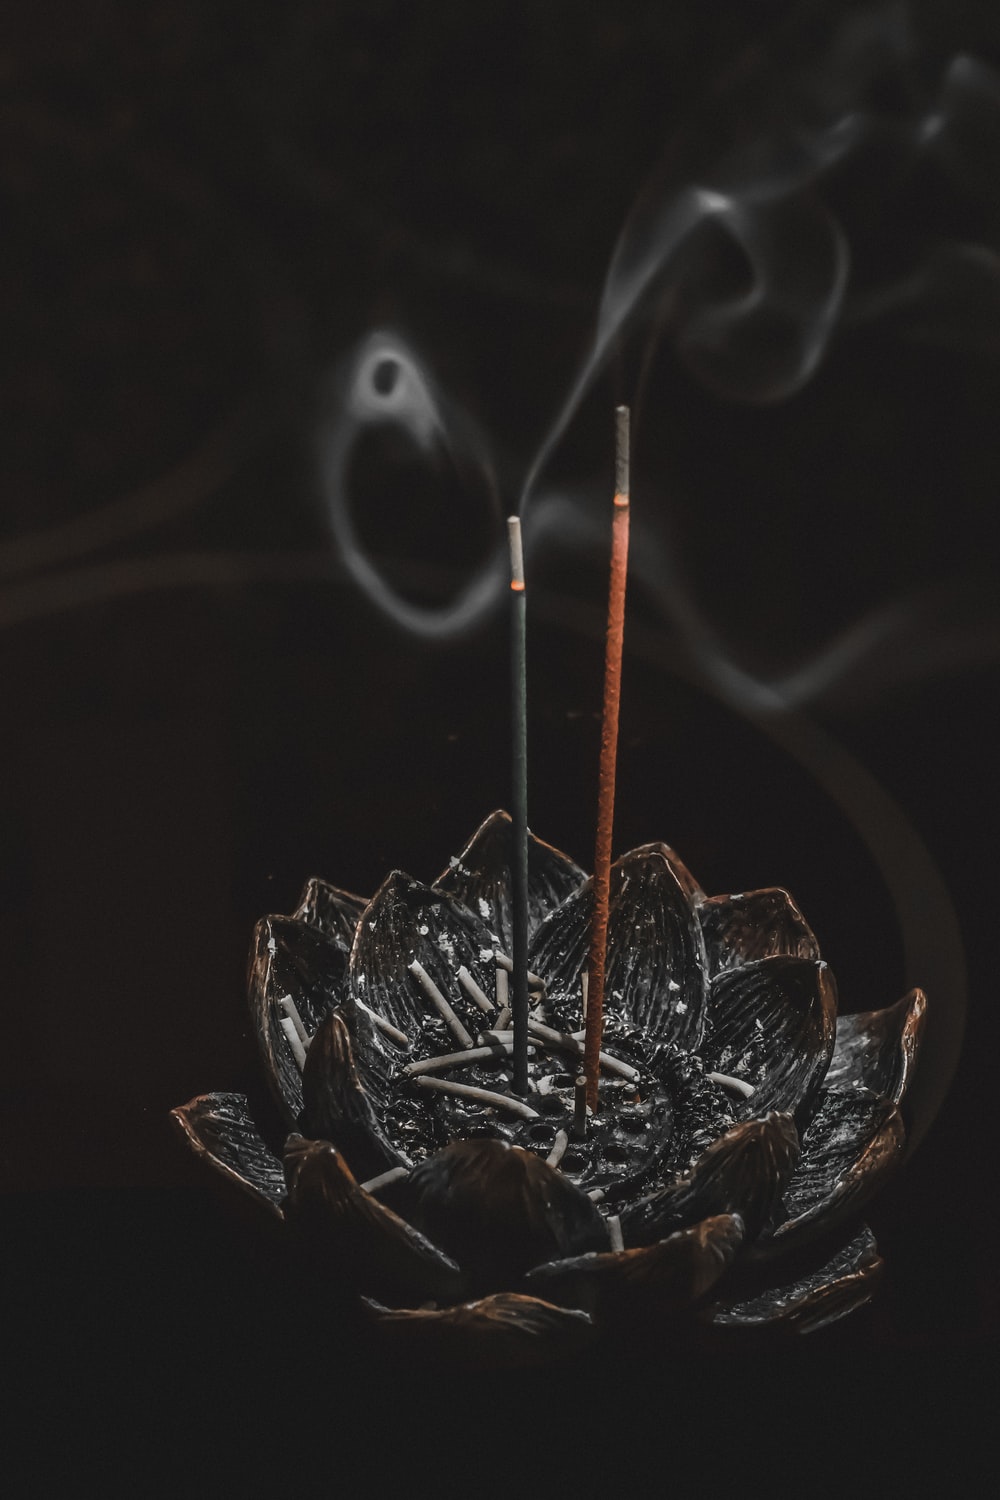 Incense Burning Picture. Download Free Image